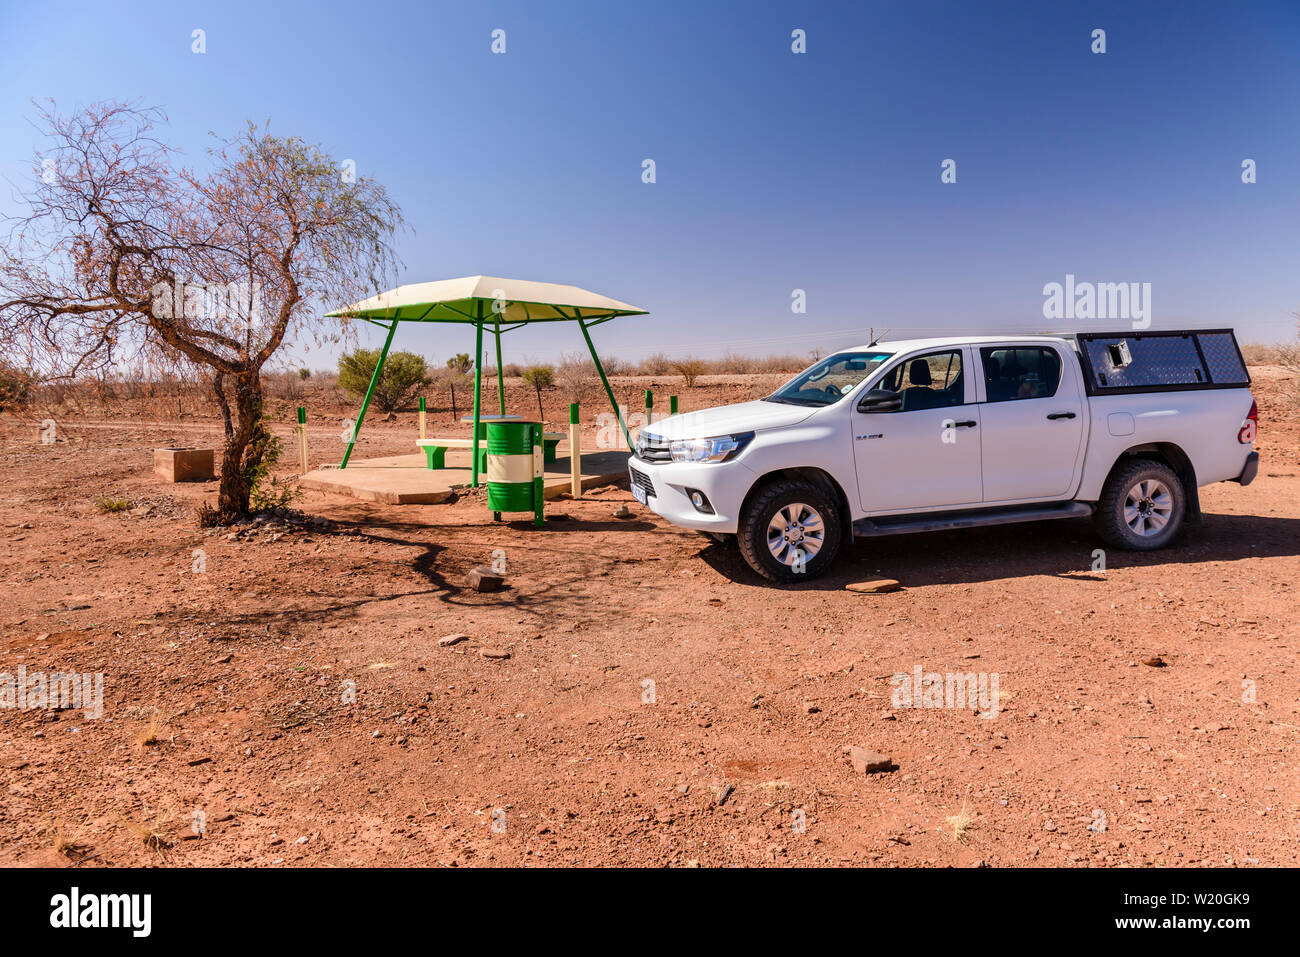 Toyota Hilux pick-up truck stopped beside a concrete picnic table and benches with a canopy for shade, typically placed every 10-20kms along roads in Stock Photo